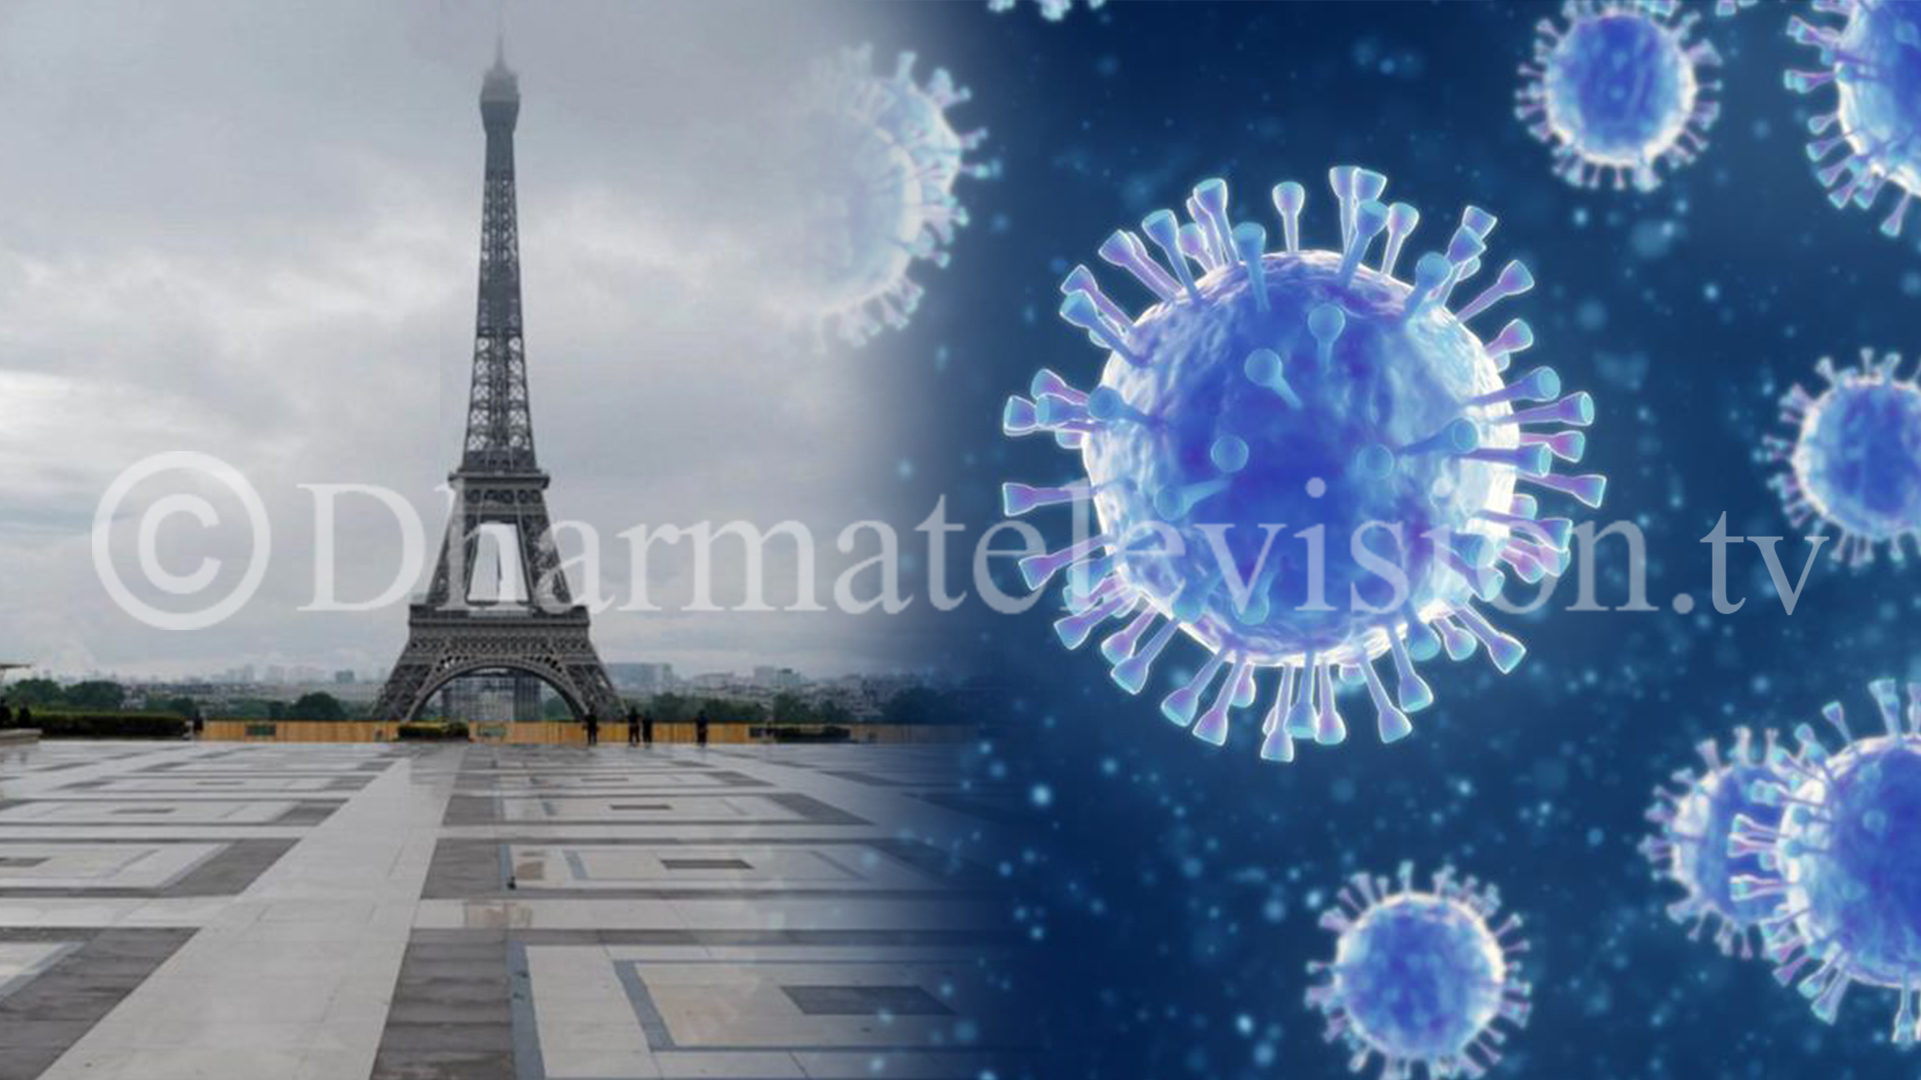 Covid-19 infections declined in France